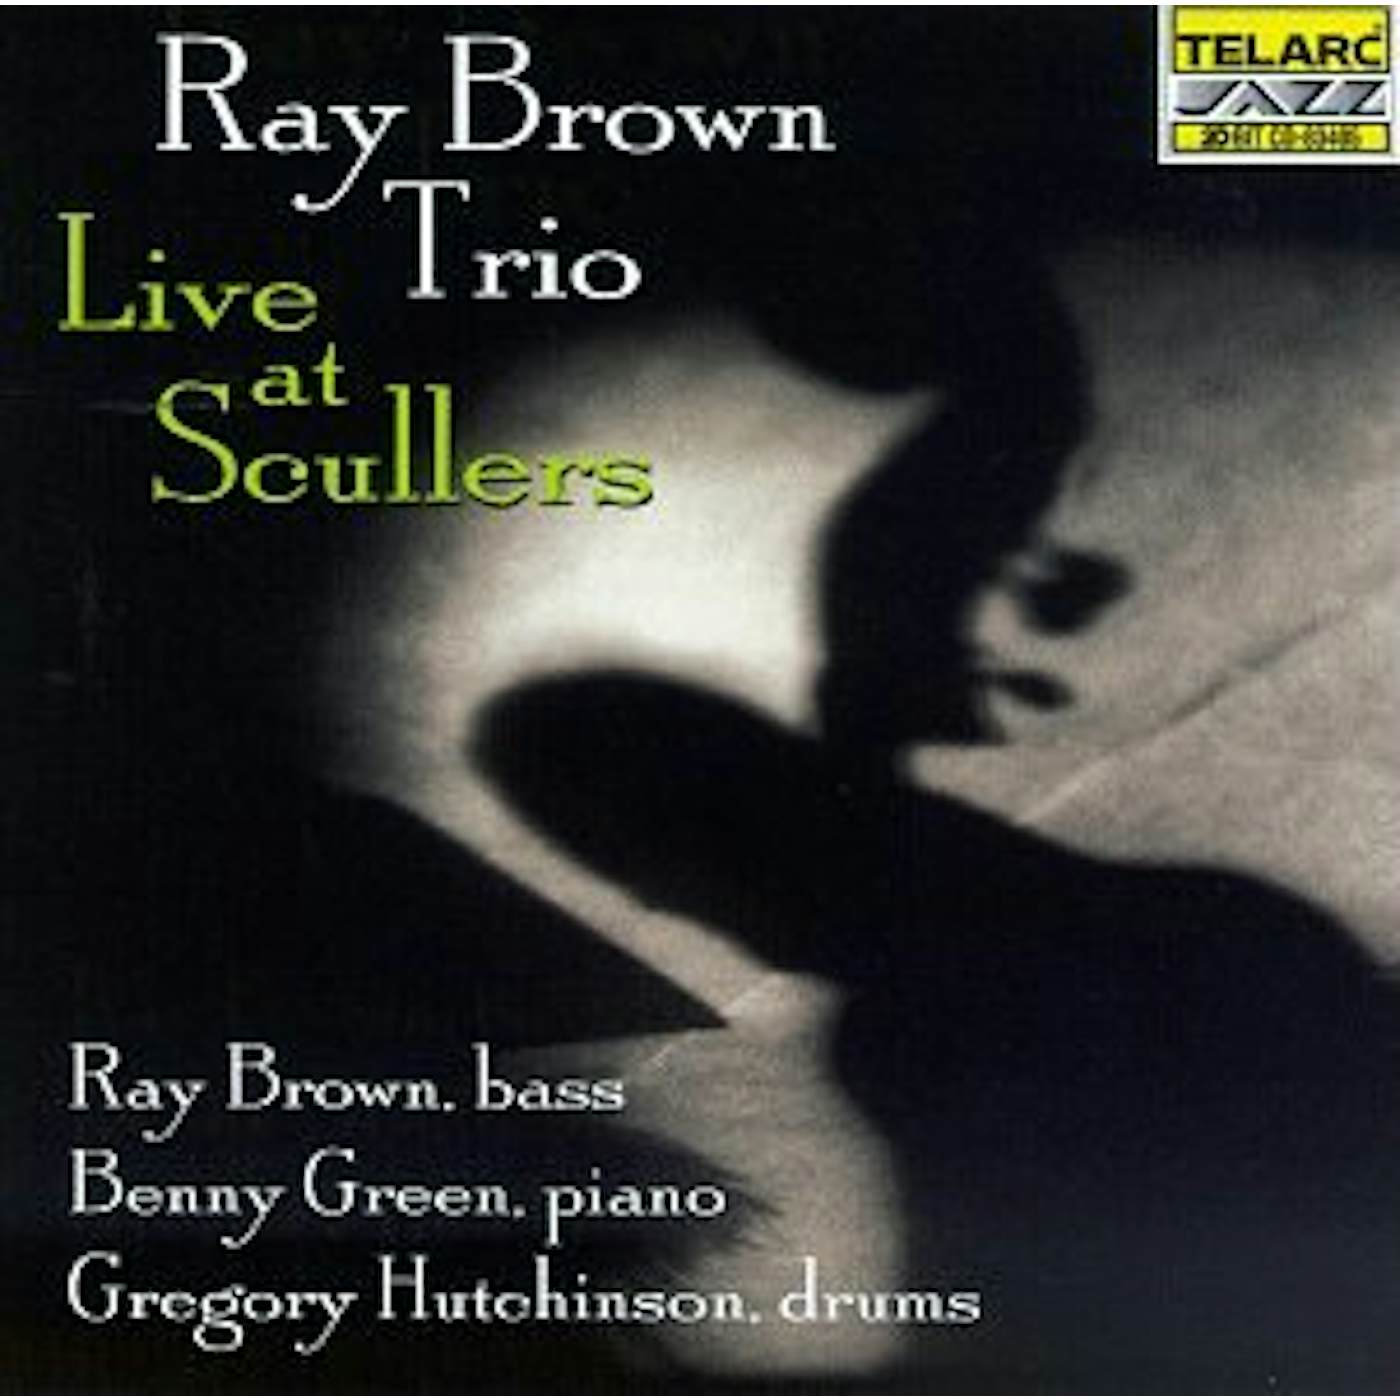 Ray Brown Trio LIVE AT SCULLERS CD